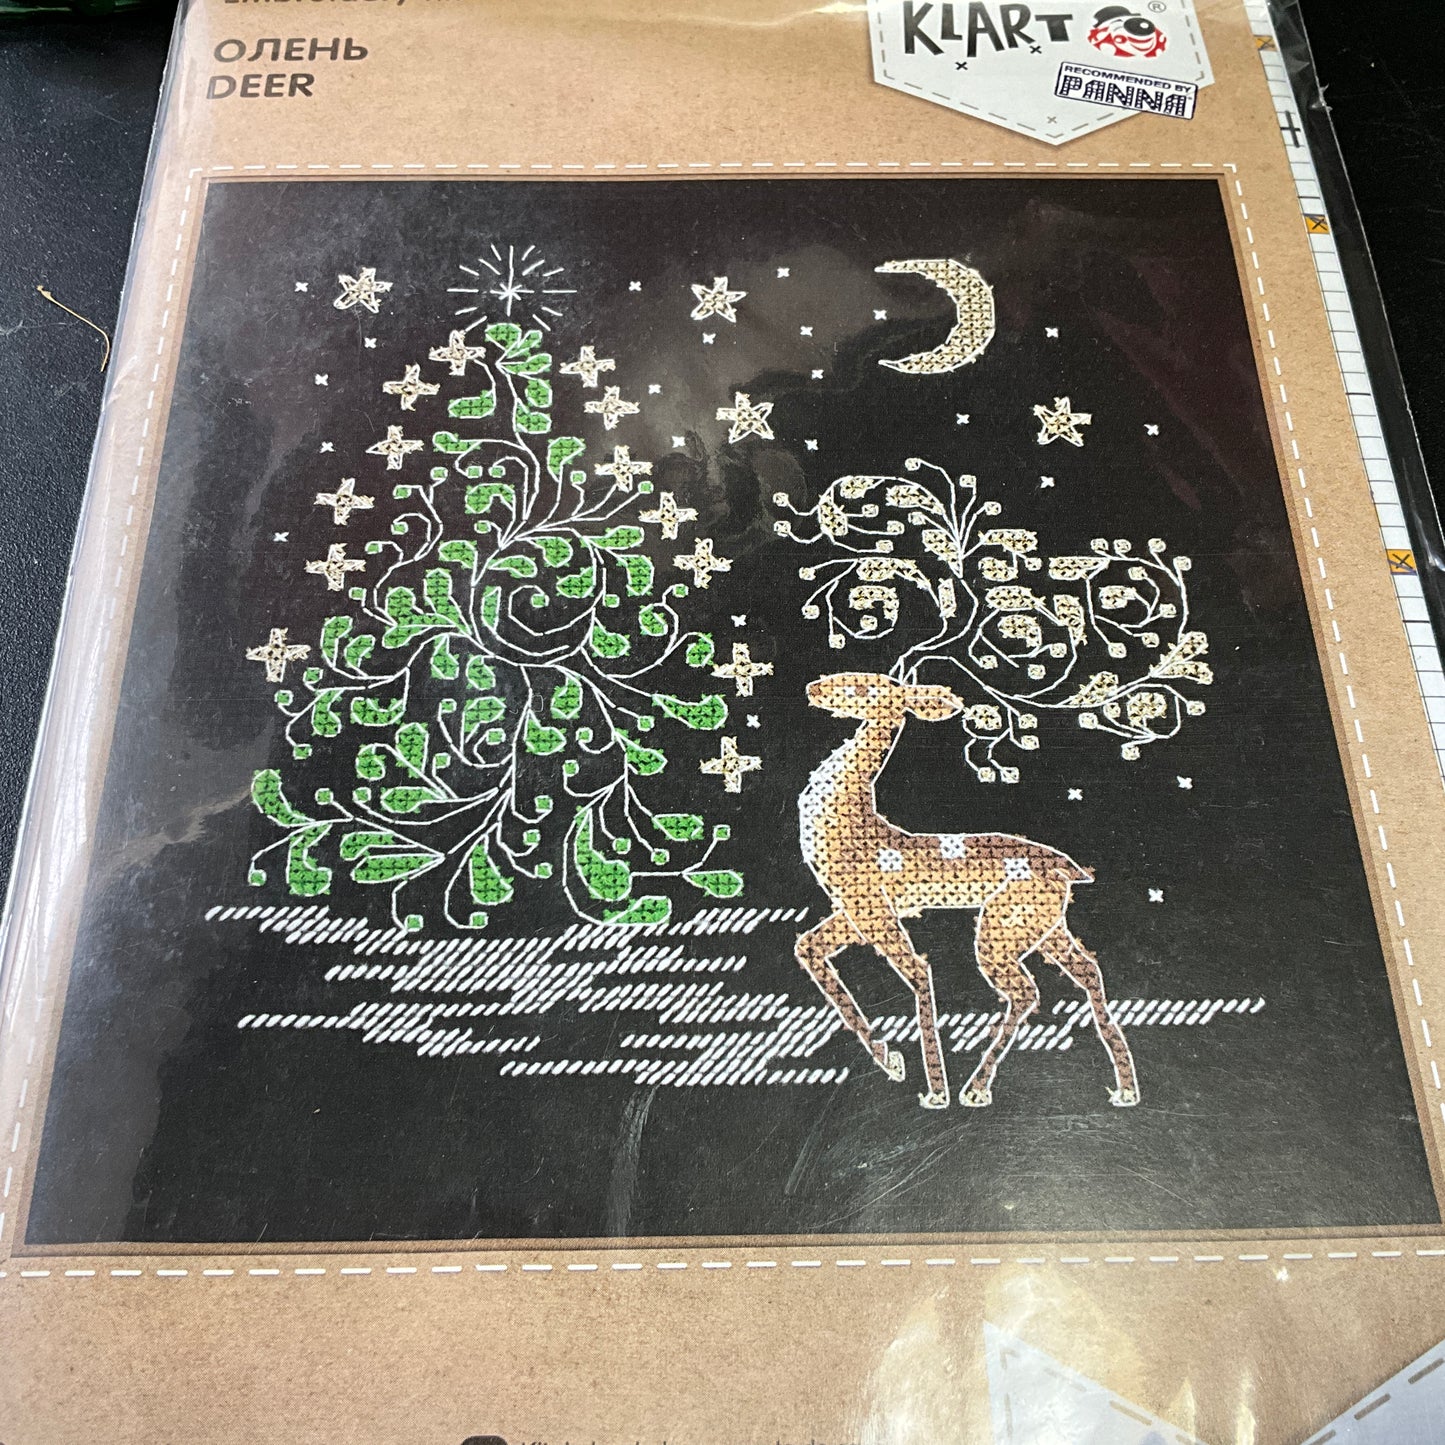 Klart Deer with tree recommended by Panna 8-289 embroidery kit